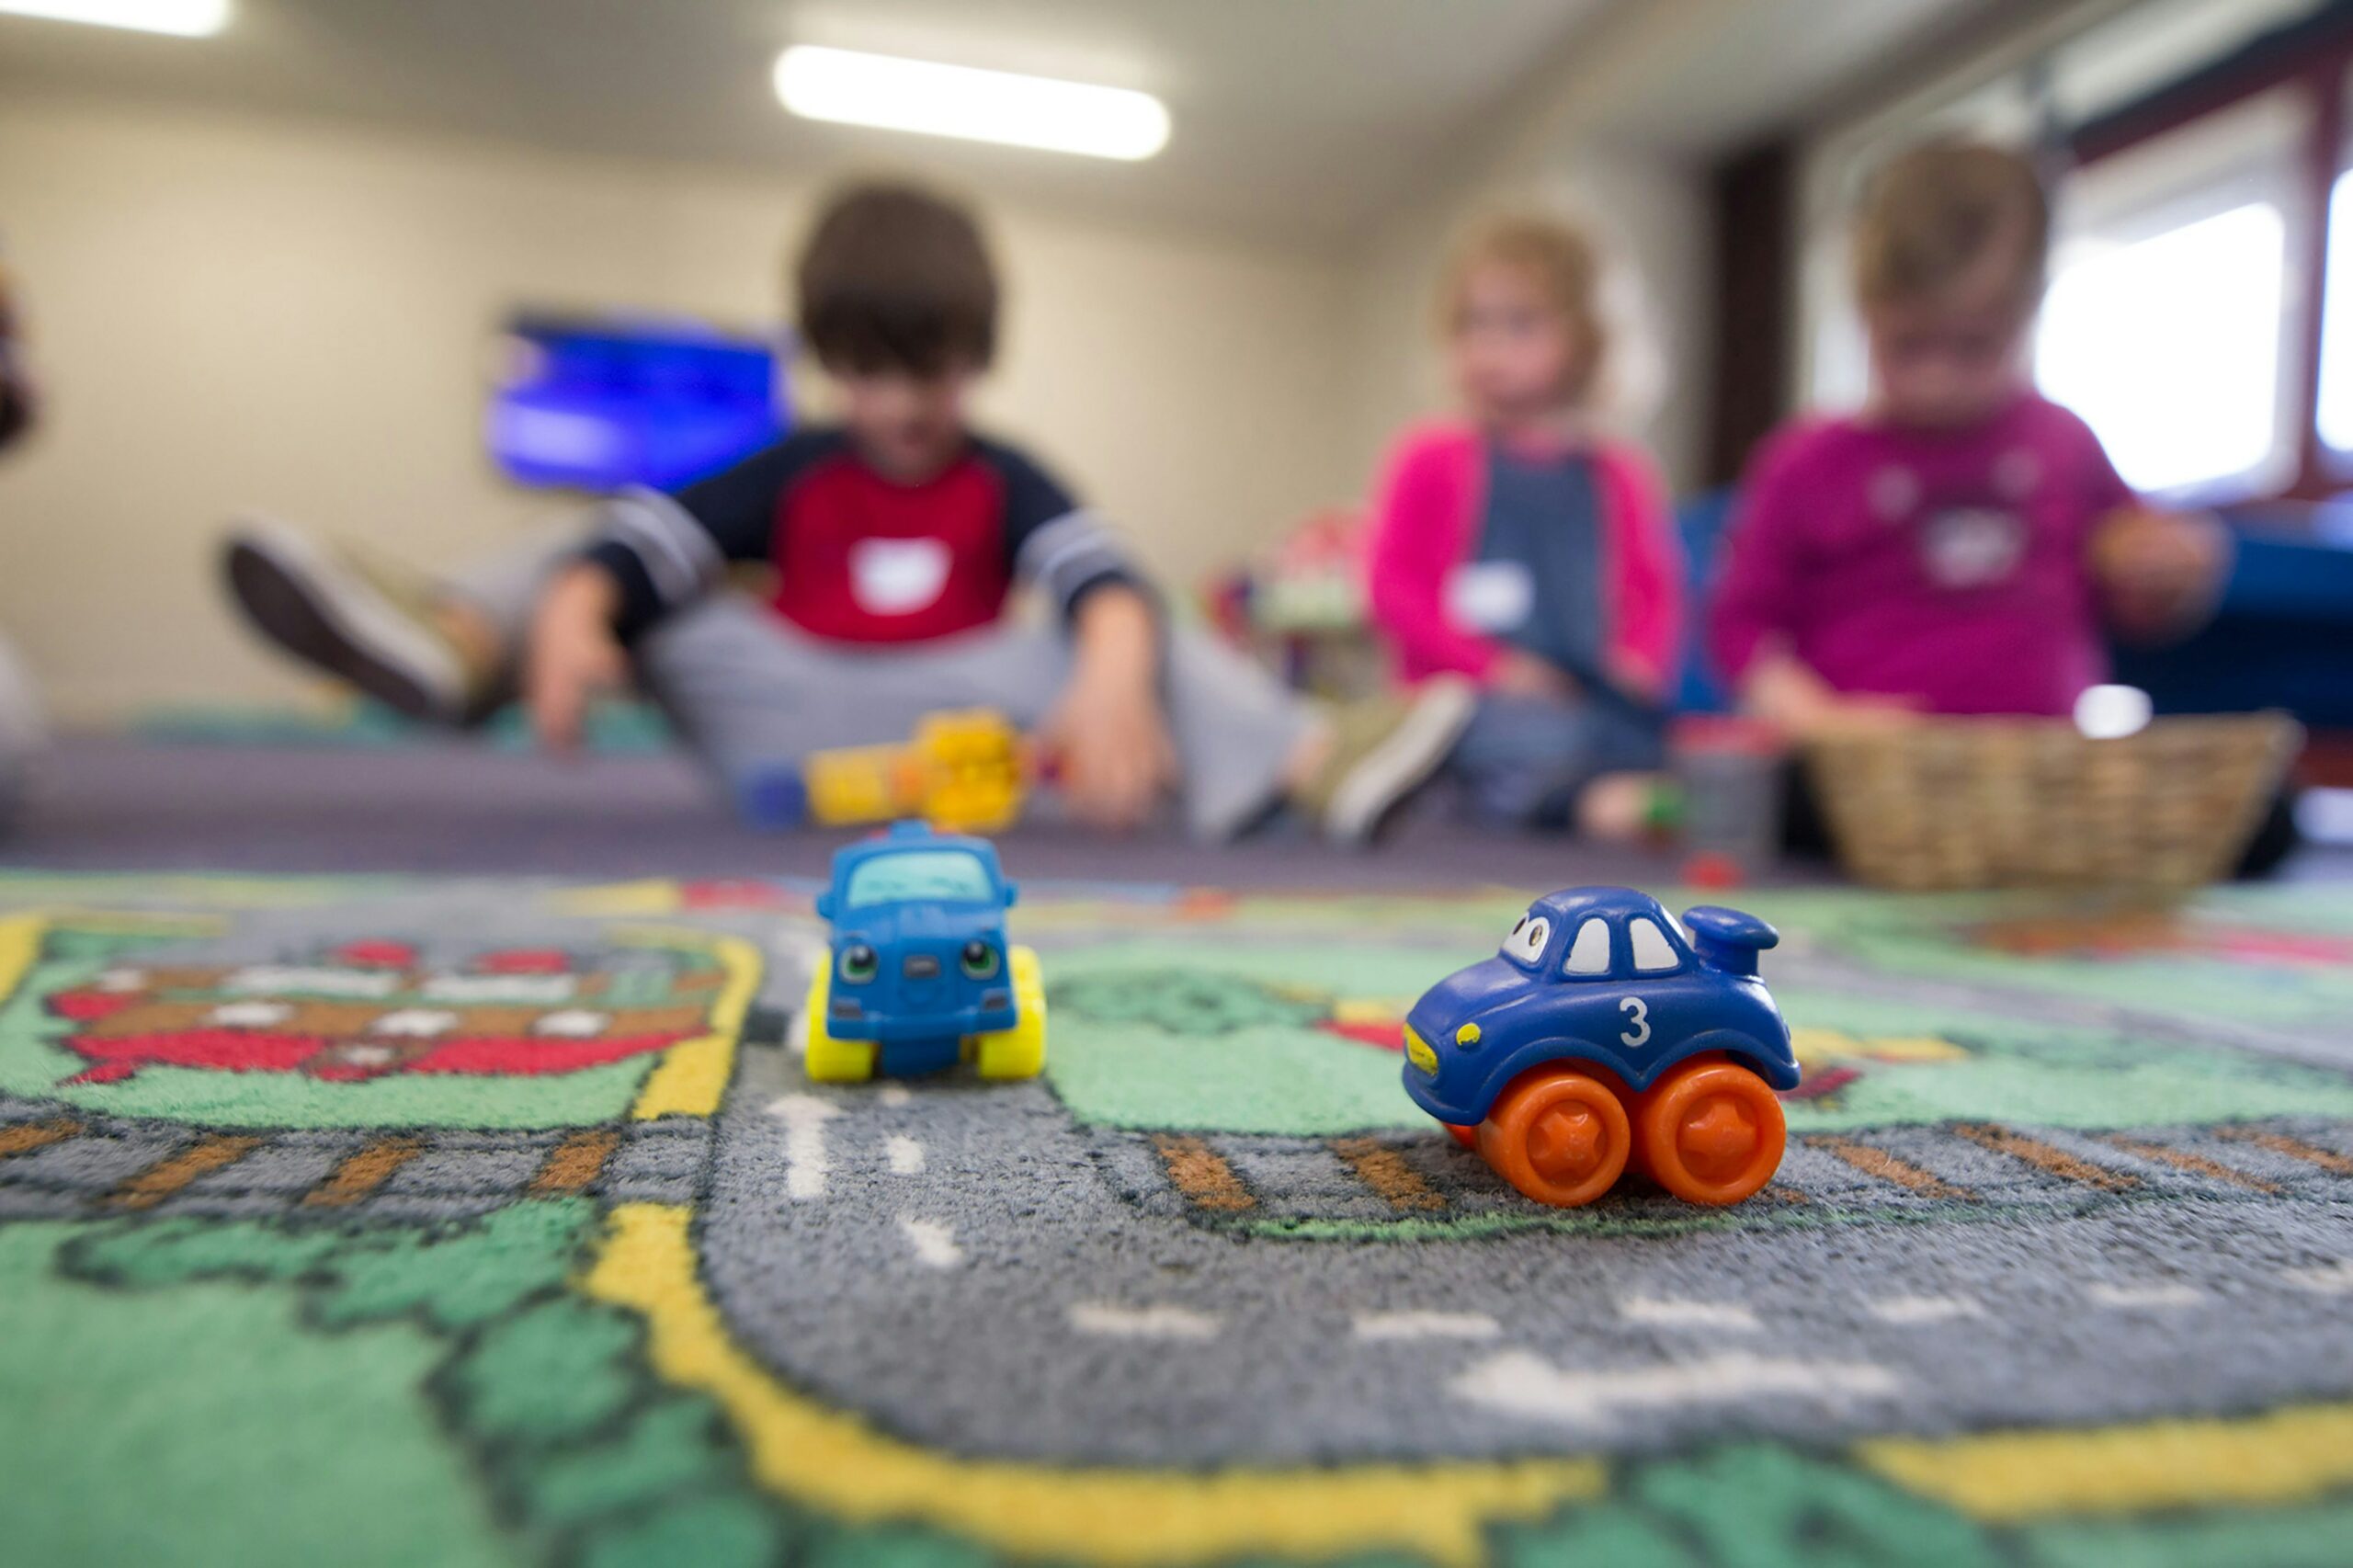 kids playing on a mat with toy cars